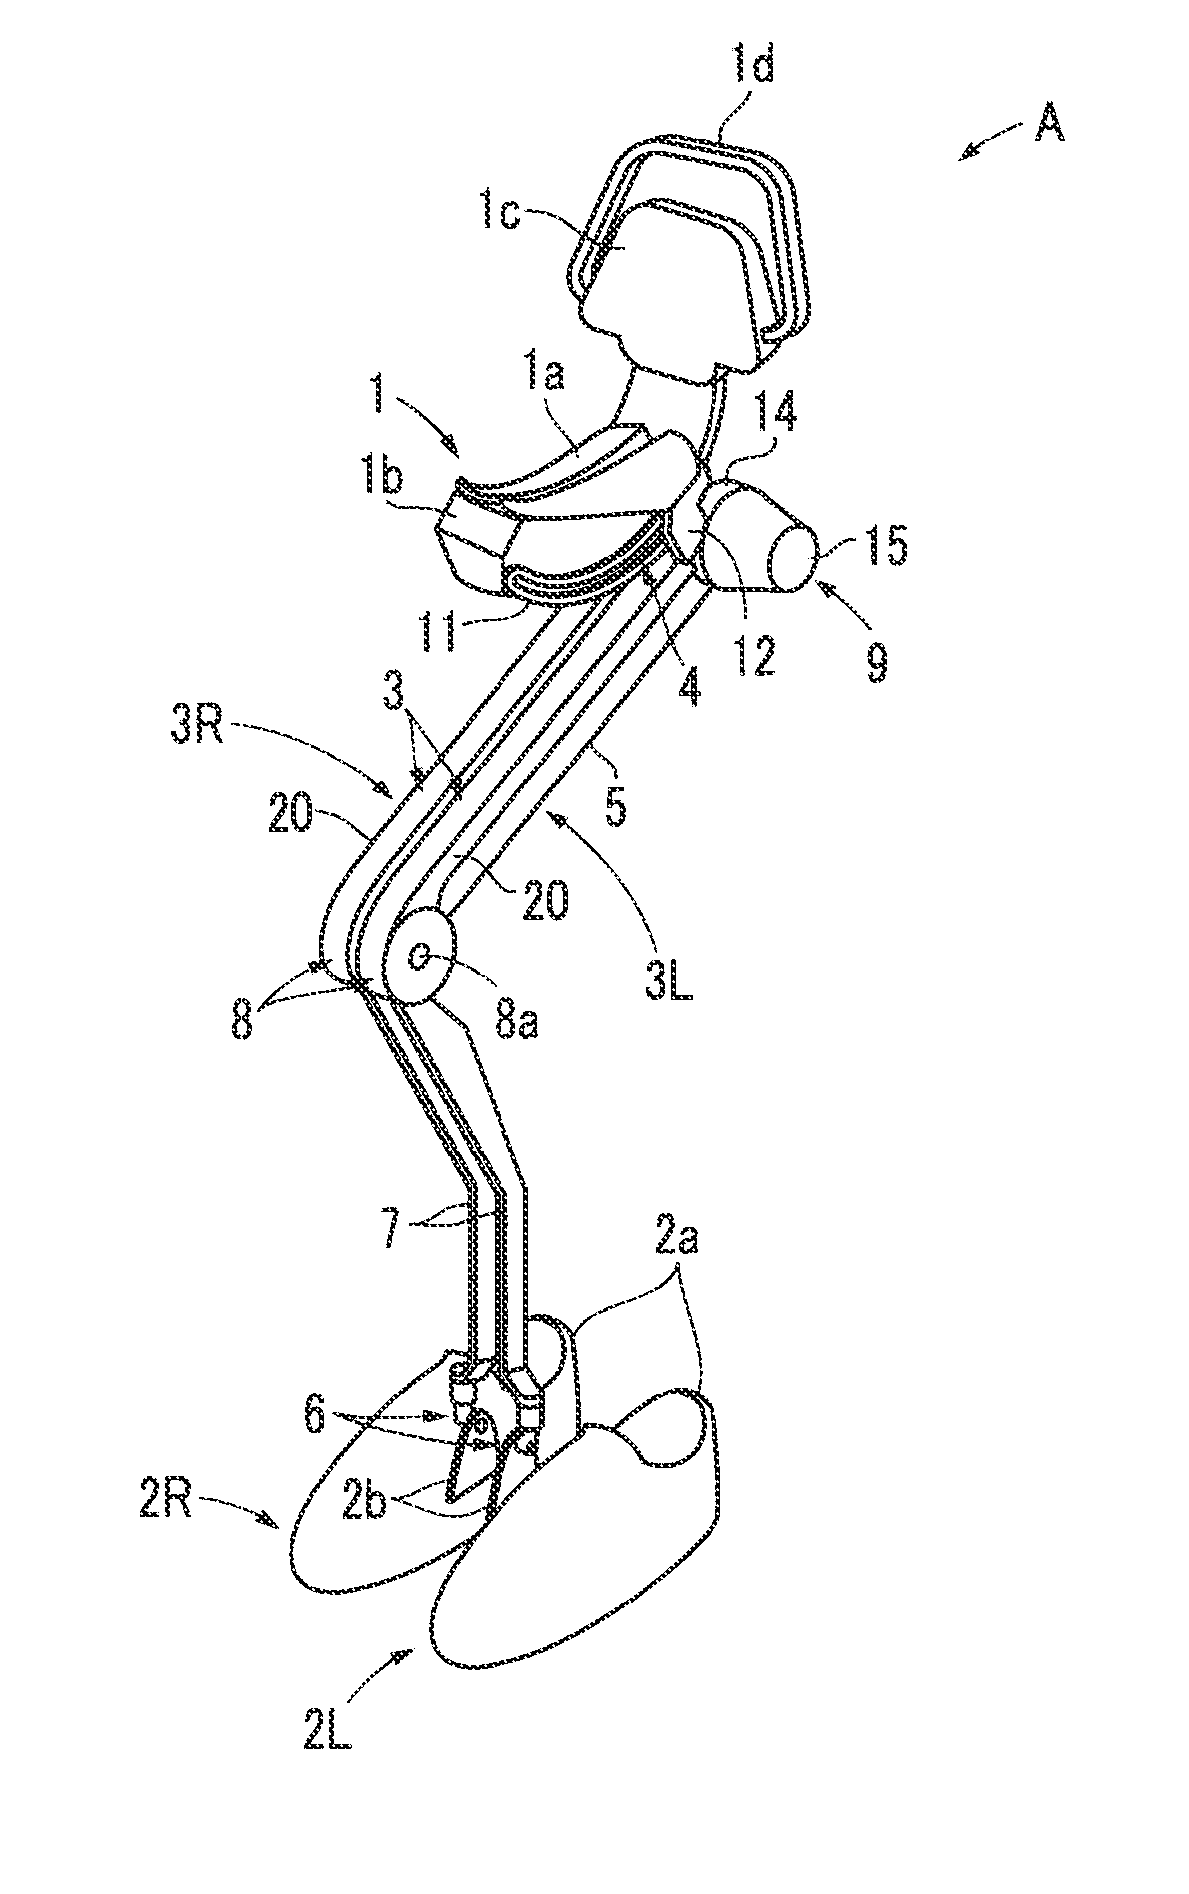 Motion assist device and walking assist device